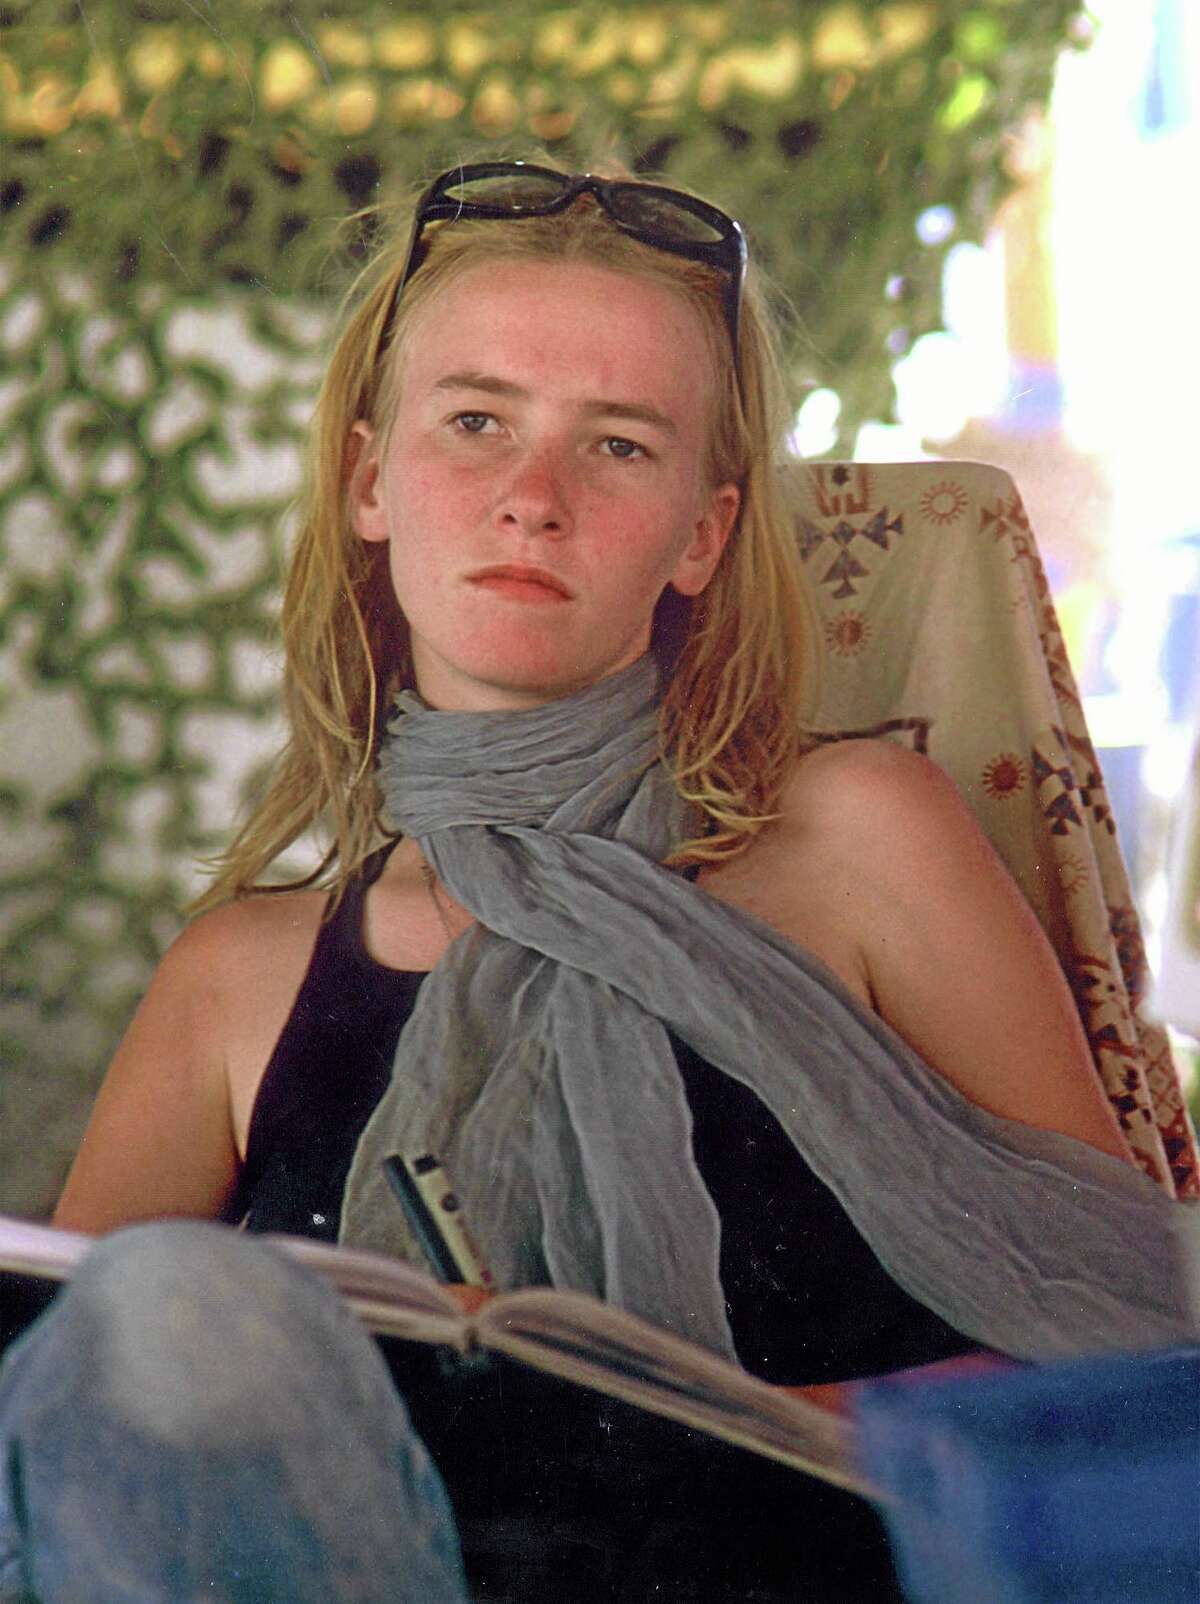 FILE - This Sept. 2002 file photo show activist Rachel Corrie is shown at the Burning Man festival in Black Rock City, Nev. The family of the slain American activist on Wednesday, May 21, 2014 appealed to the Israeli Supreme Court to overturn a lower court's ruling and hold the military accountable for their daughter's death. Corrie was crushed to death over a decade ago by an Israeli military bulldozer razing Palestinian homes in an area the army said militants used for cover, in the southern town of Rafah near the Gaza border with Egypt.(AP Photo/Denny Sternstein, File)